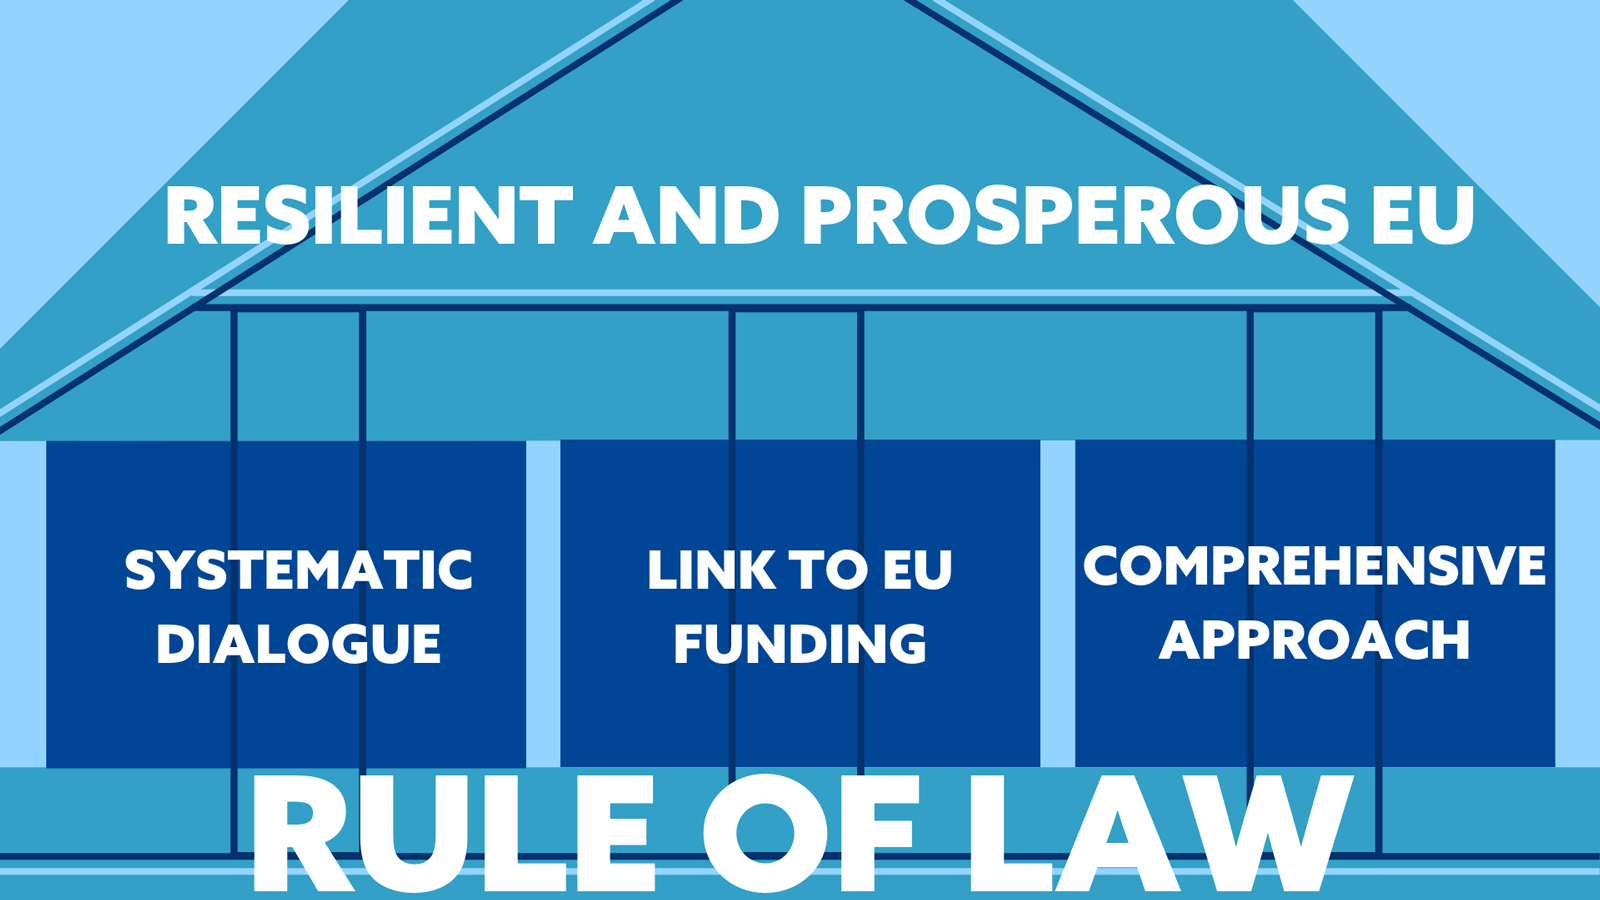 The image illustrates how rule of law forms the basis for a safe and prosperous EU. Rule of law is strengthened through dialogue, linkage to EU funding, and cooperation.